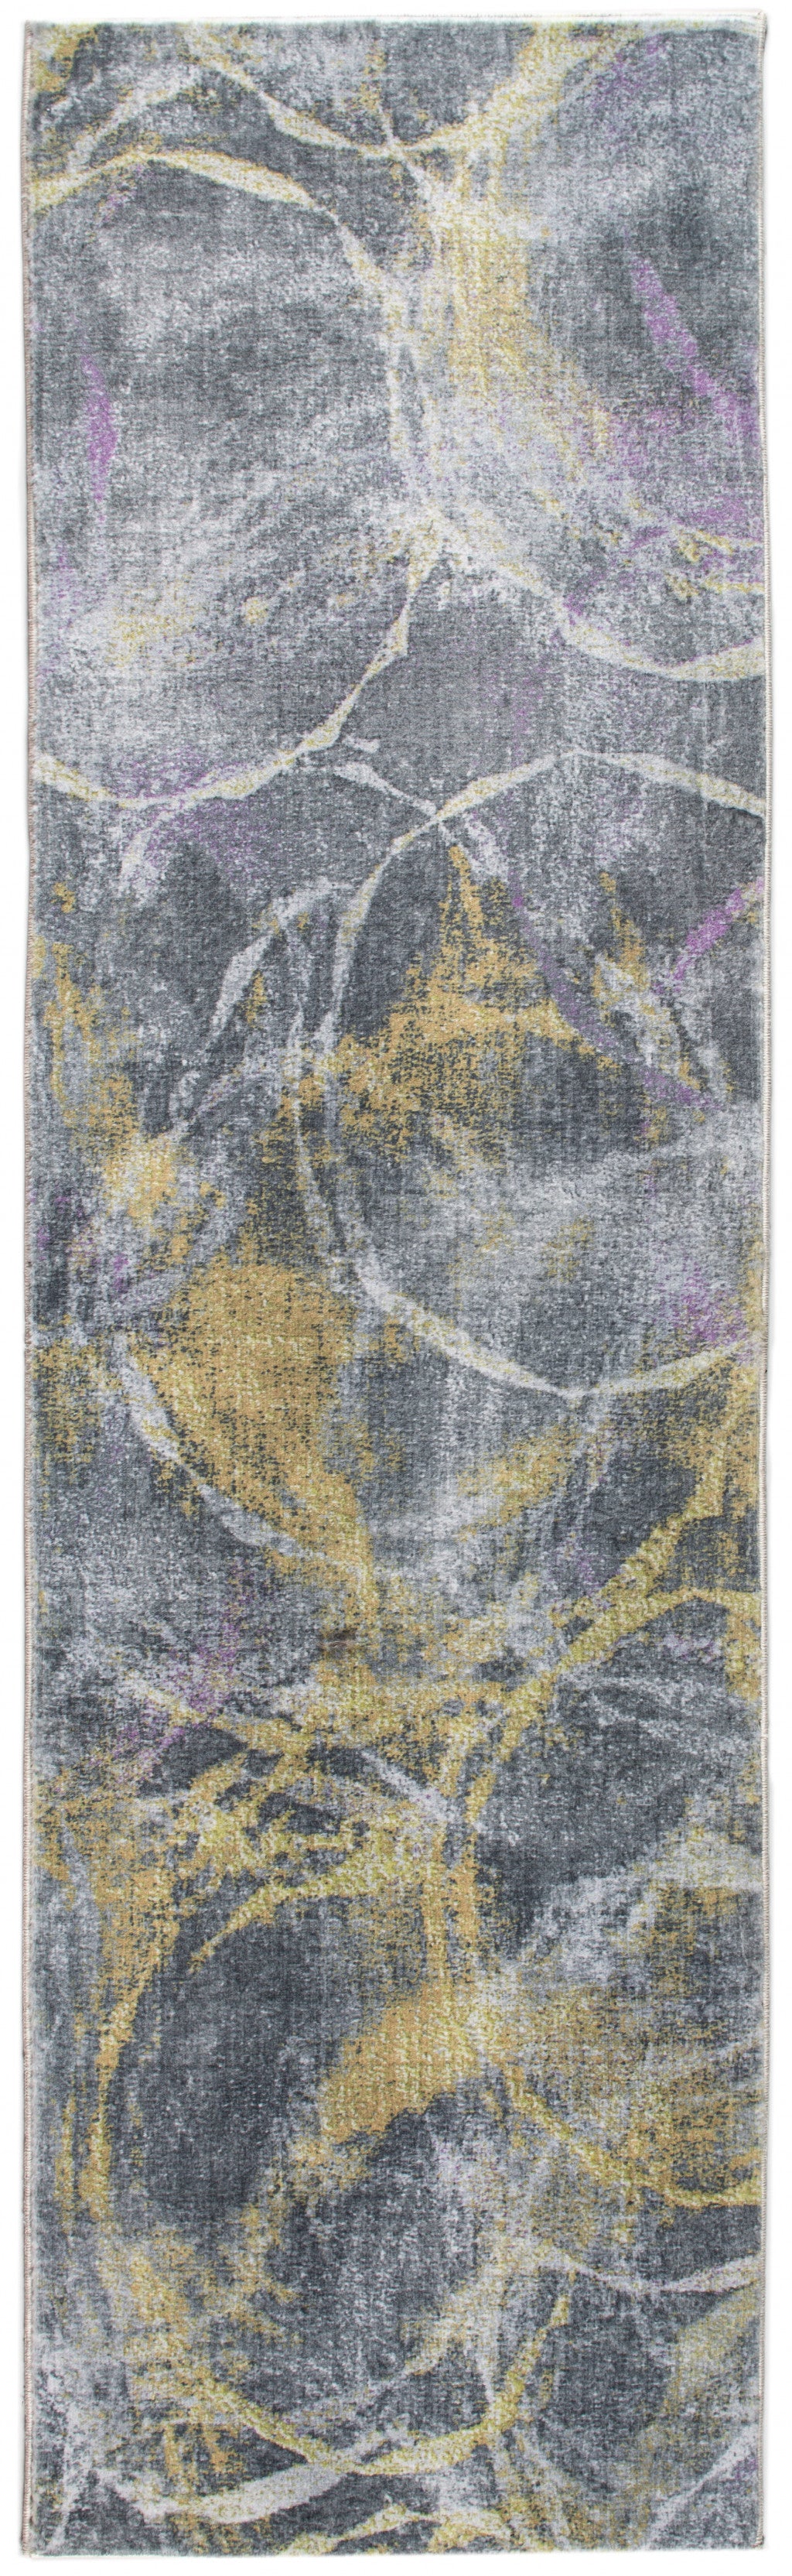 8' X 10' Gray Abstract Dhurrie Area Rug